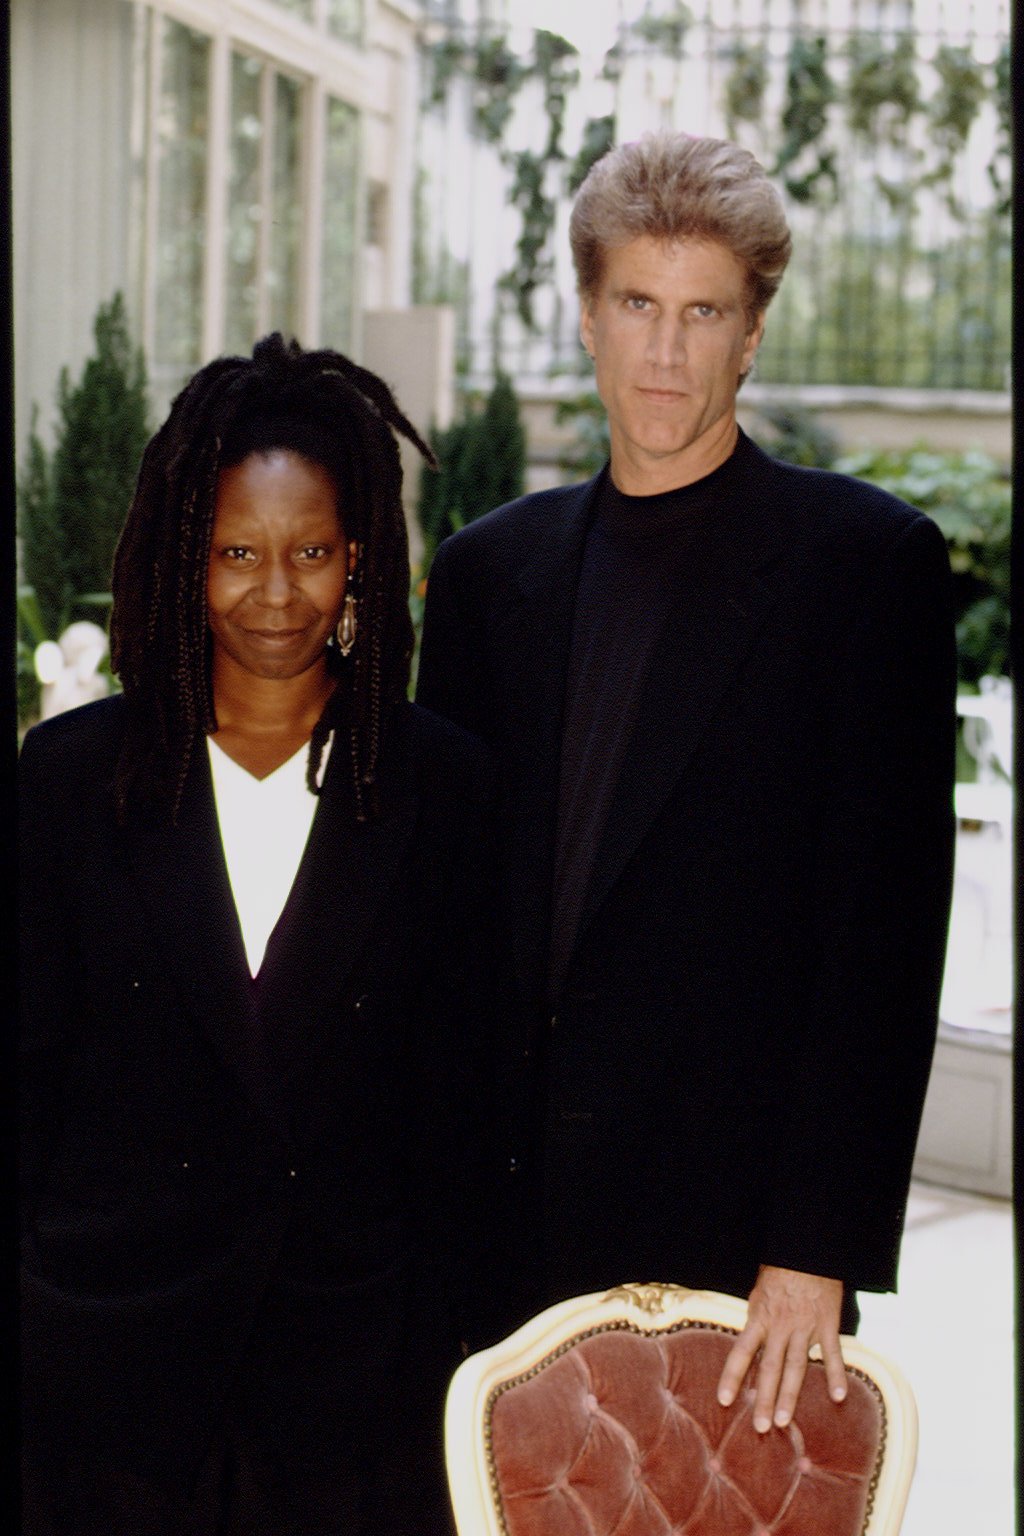 Ted Danson and Whoopi Goldberg at the Ritz Hotel in April 1993 | Source: Getty Images